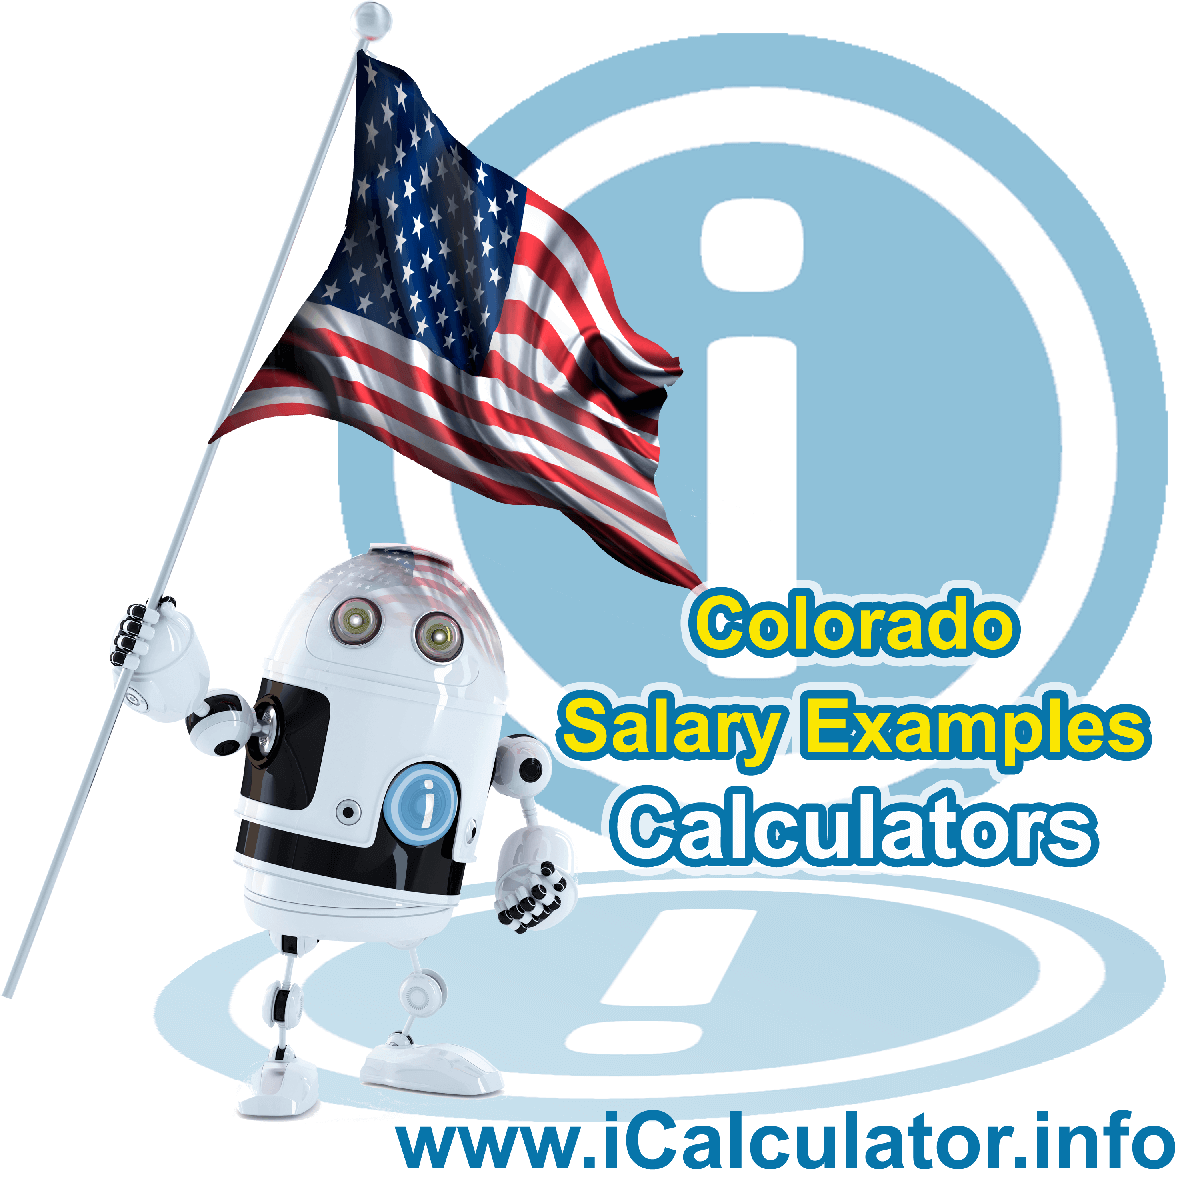 $ 160,000.00 After Tax in Colorado| iCalculator™ | $ 160,000.00 salary after tax example for 2023 tax year in Colorado. Federal and Colorado State income tax plus social security deductions and personal tax exemptions and tax allowances for 2023 